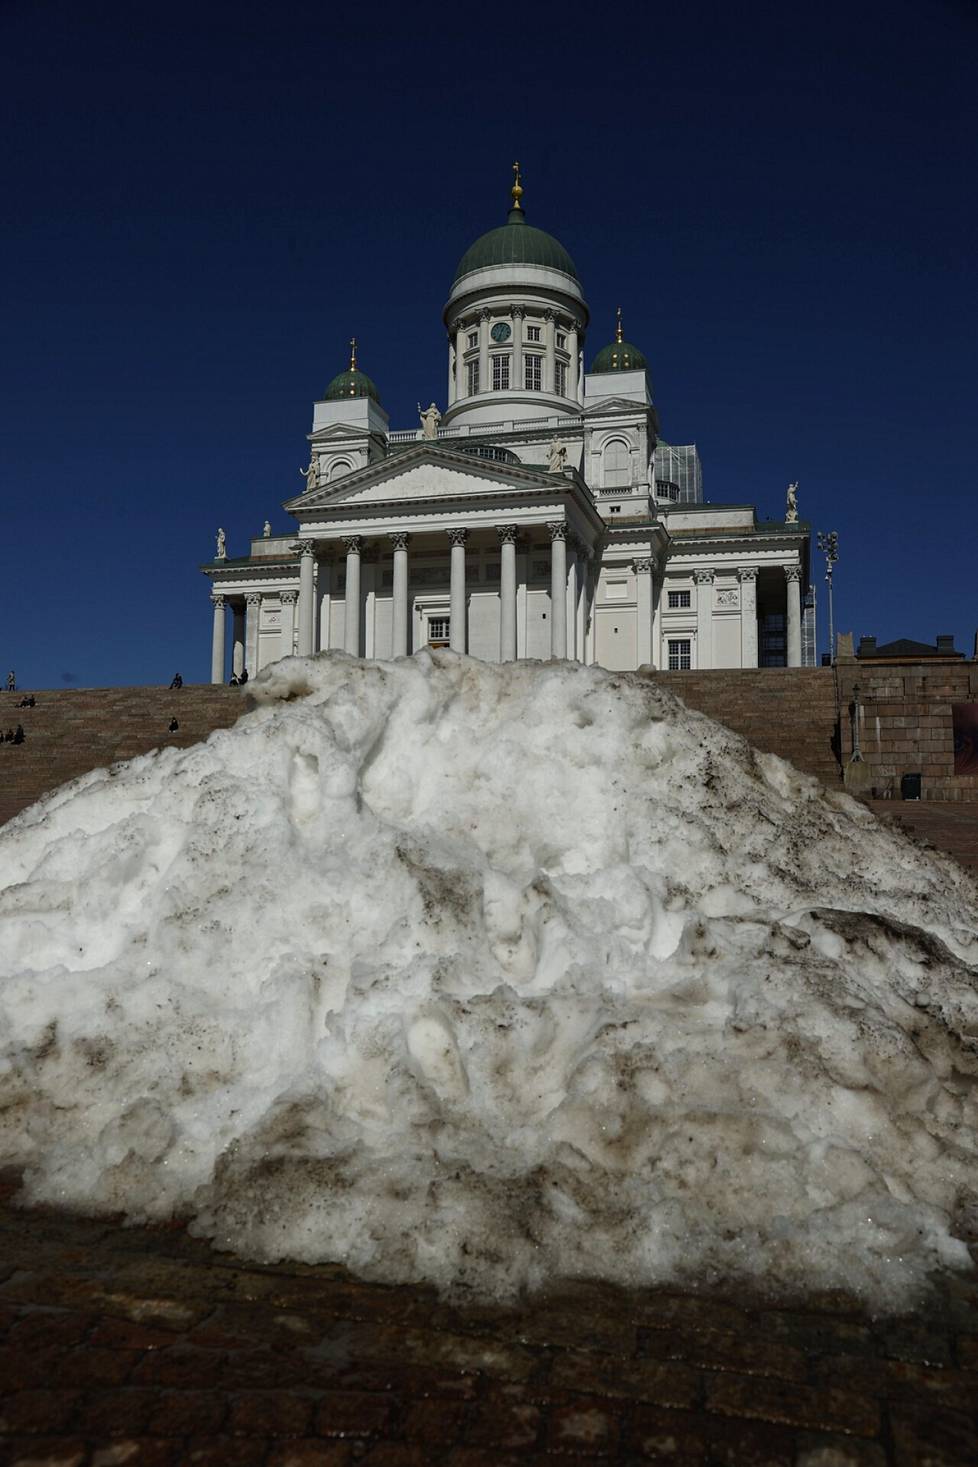 The Senate square was still decorated with a pile of snow in memory of last week's snowfall.